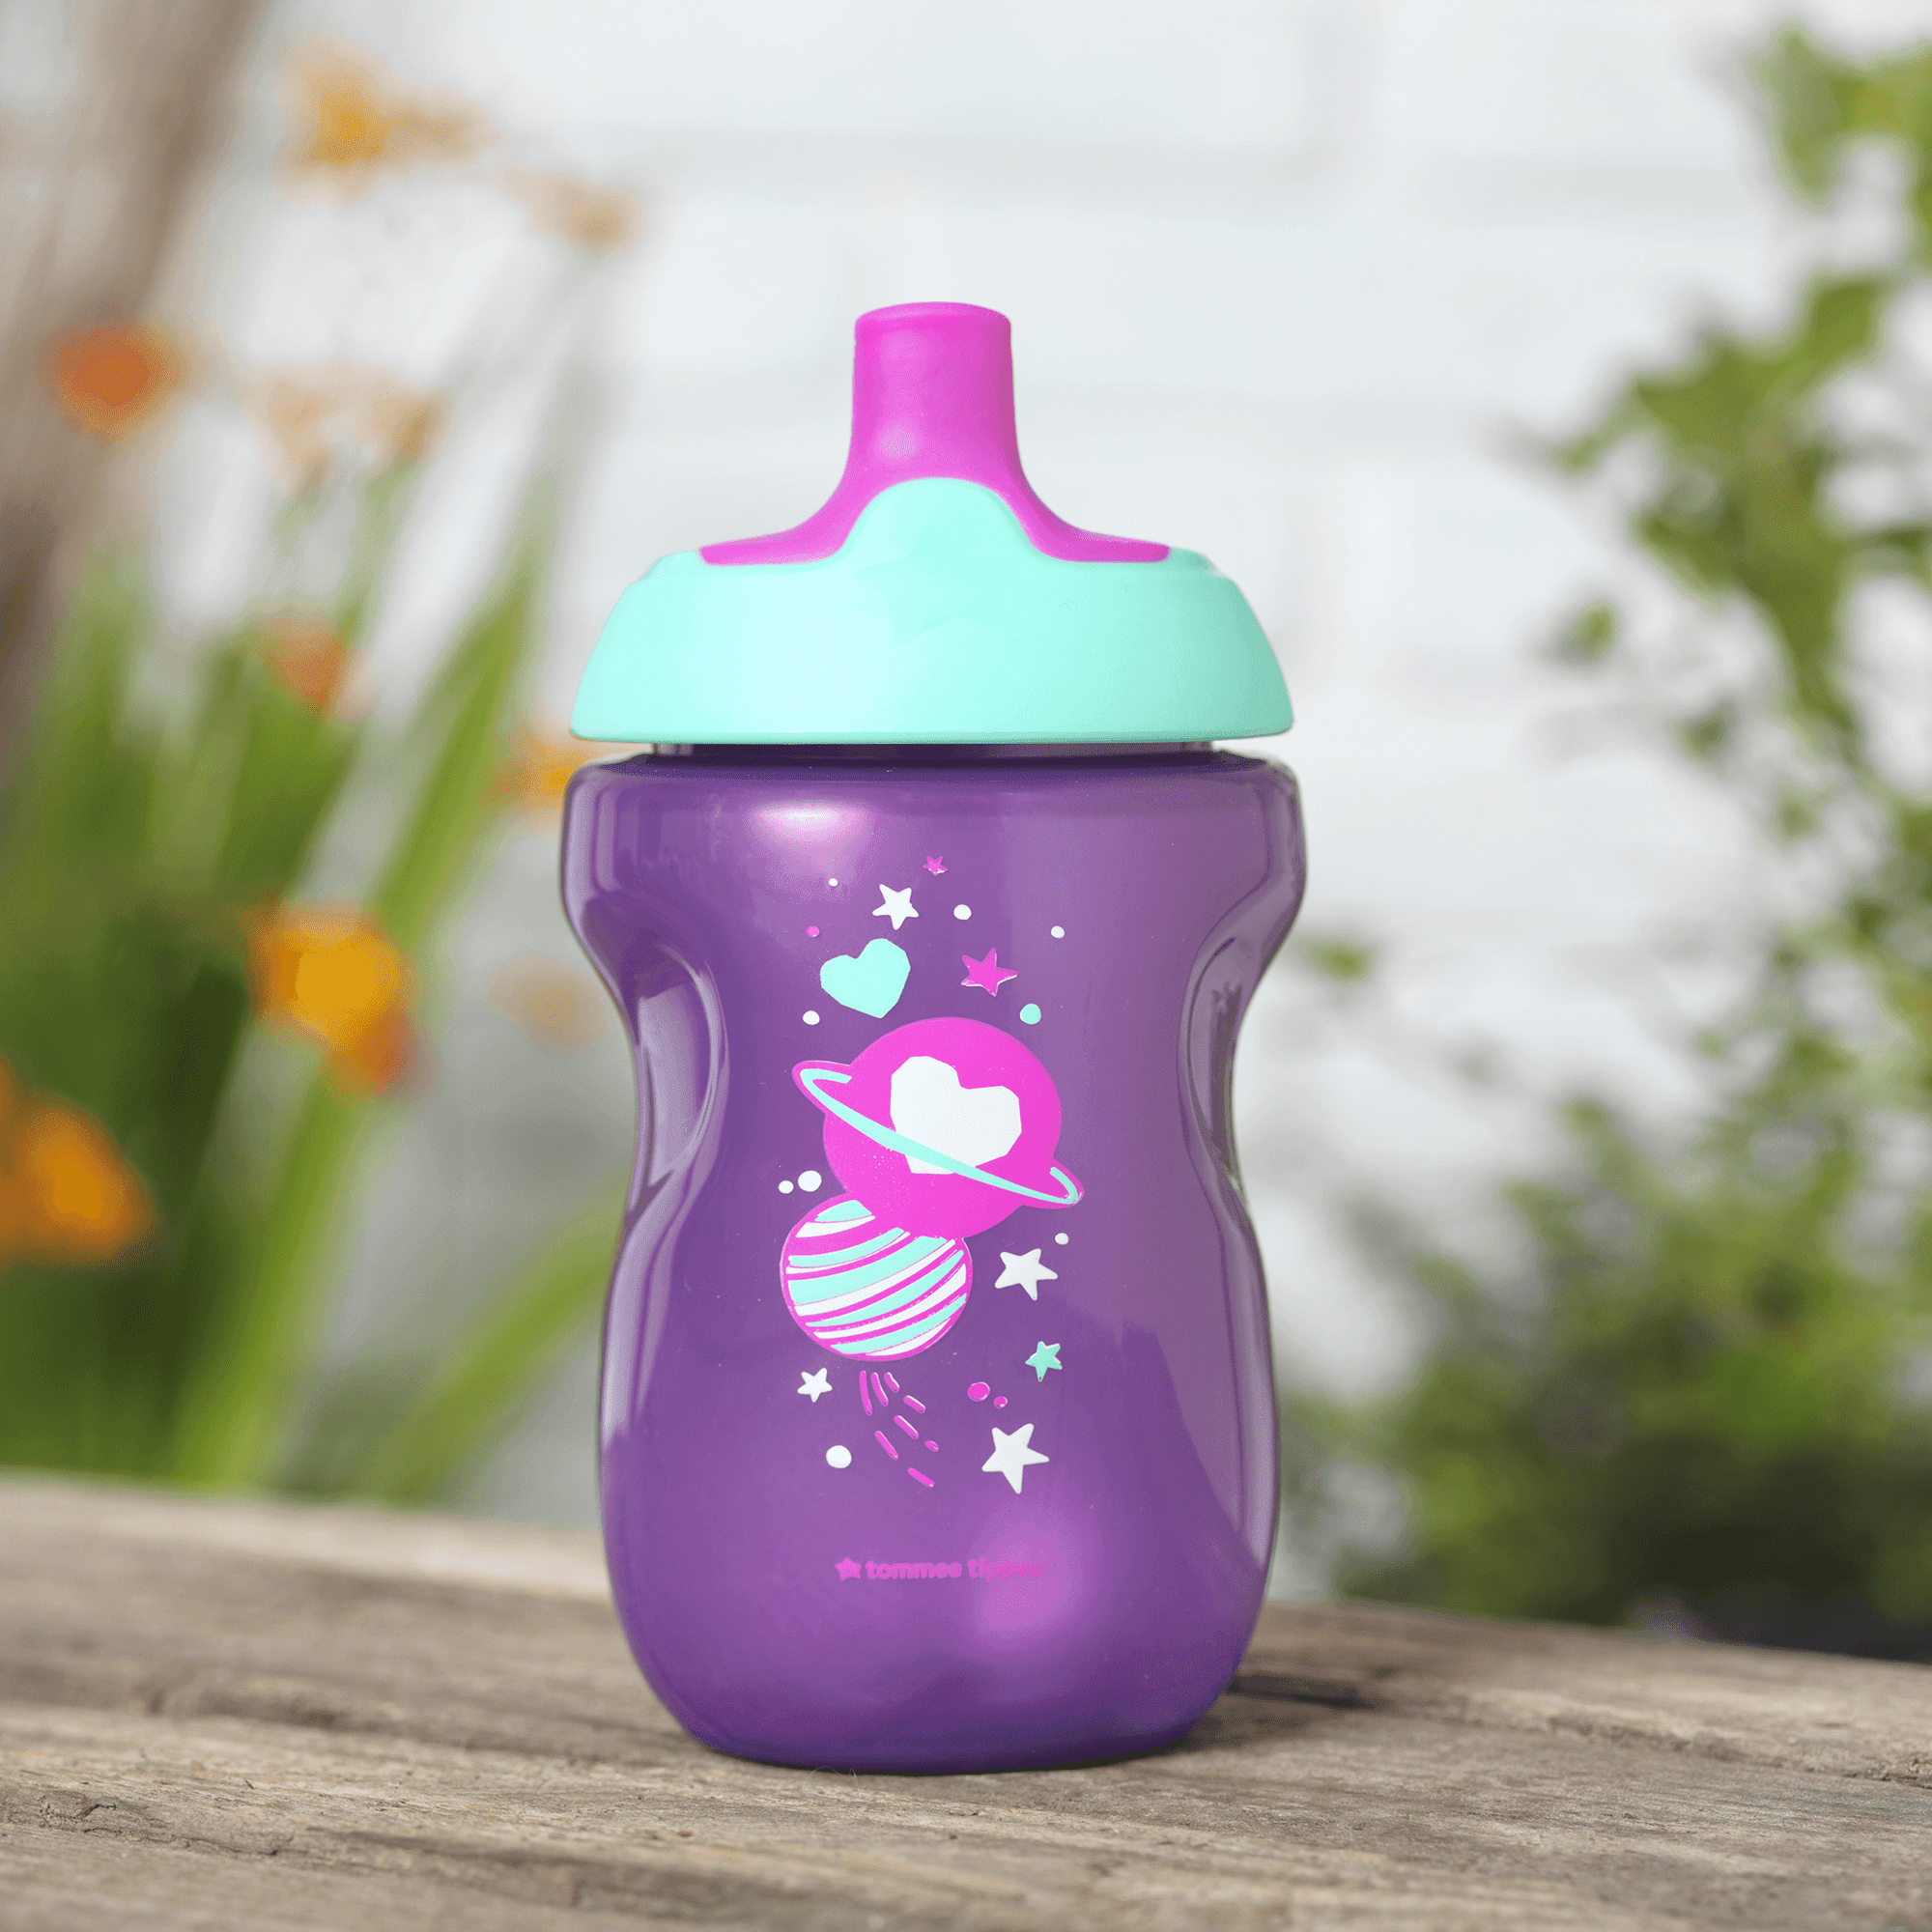 Tommee Tippee Toddler Sportee Sippy Cup, 12+ months 2pk pink/gray - D3  Surplus Outlet